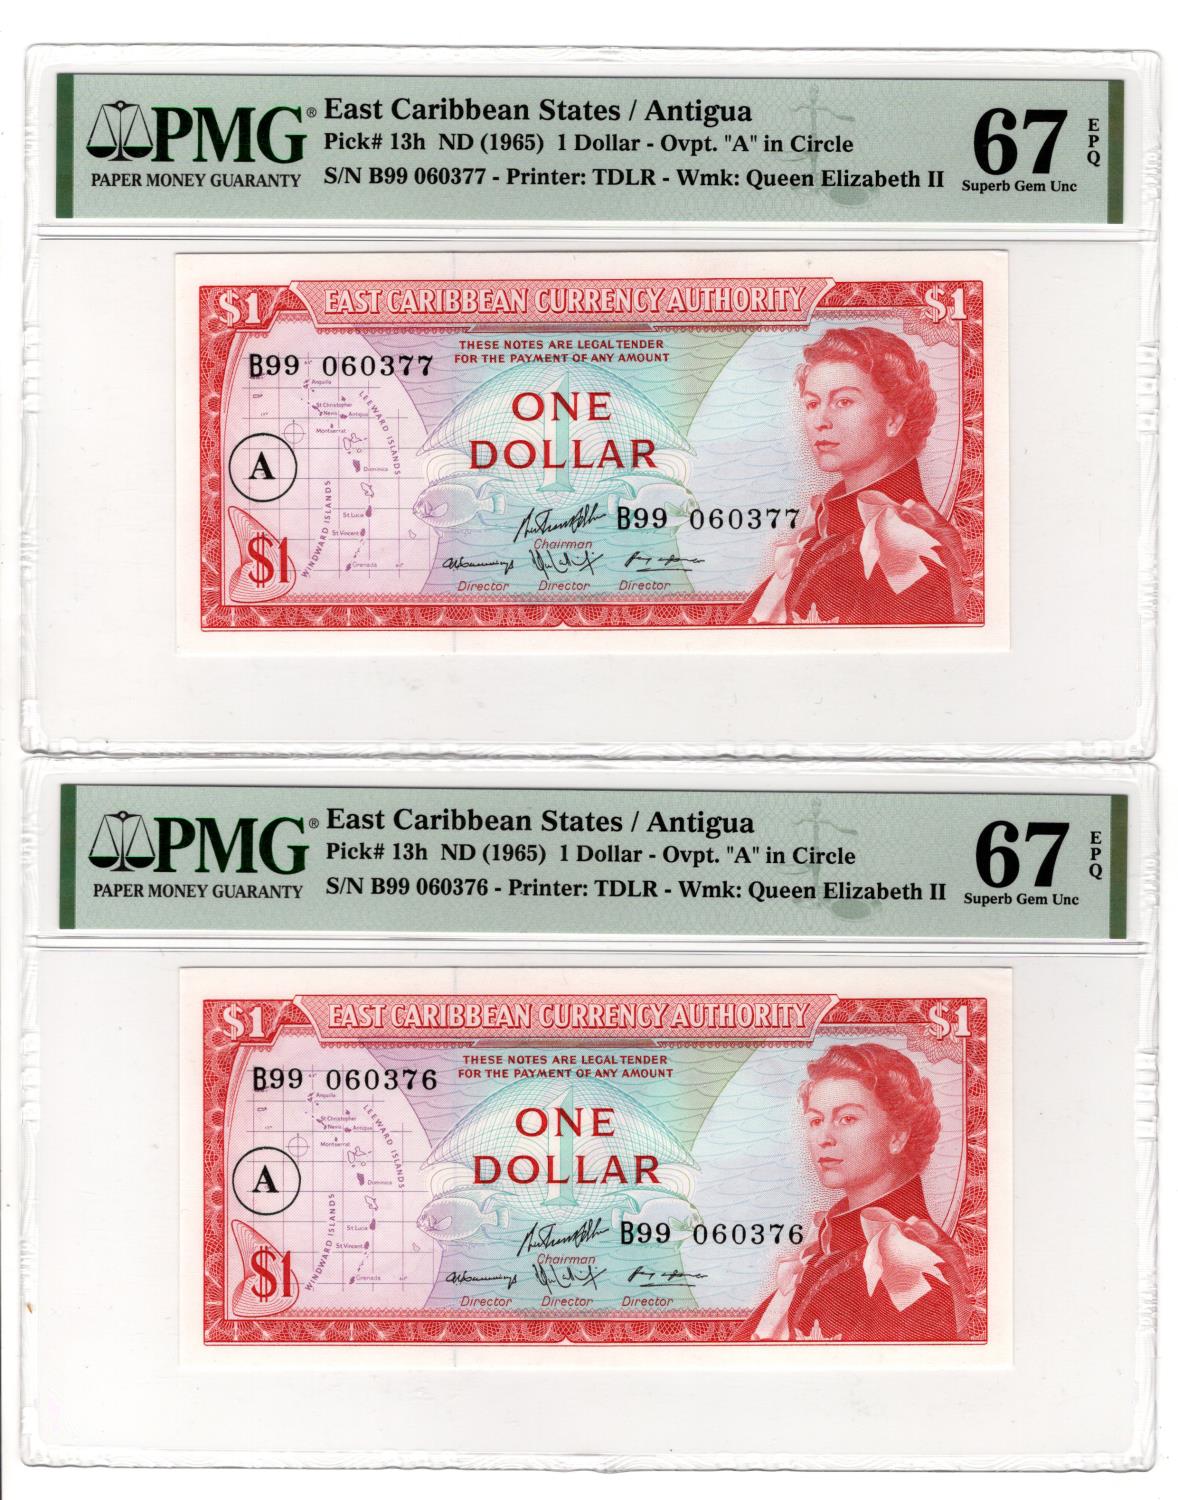 East Caribbean 1 Dollar (2) issued 1965 Antigua, overprint A in circle at left, a consecutively